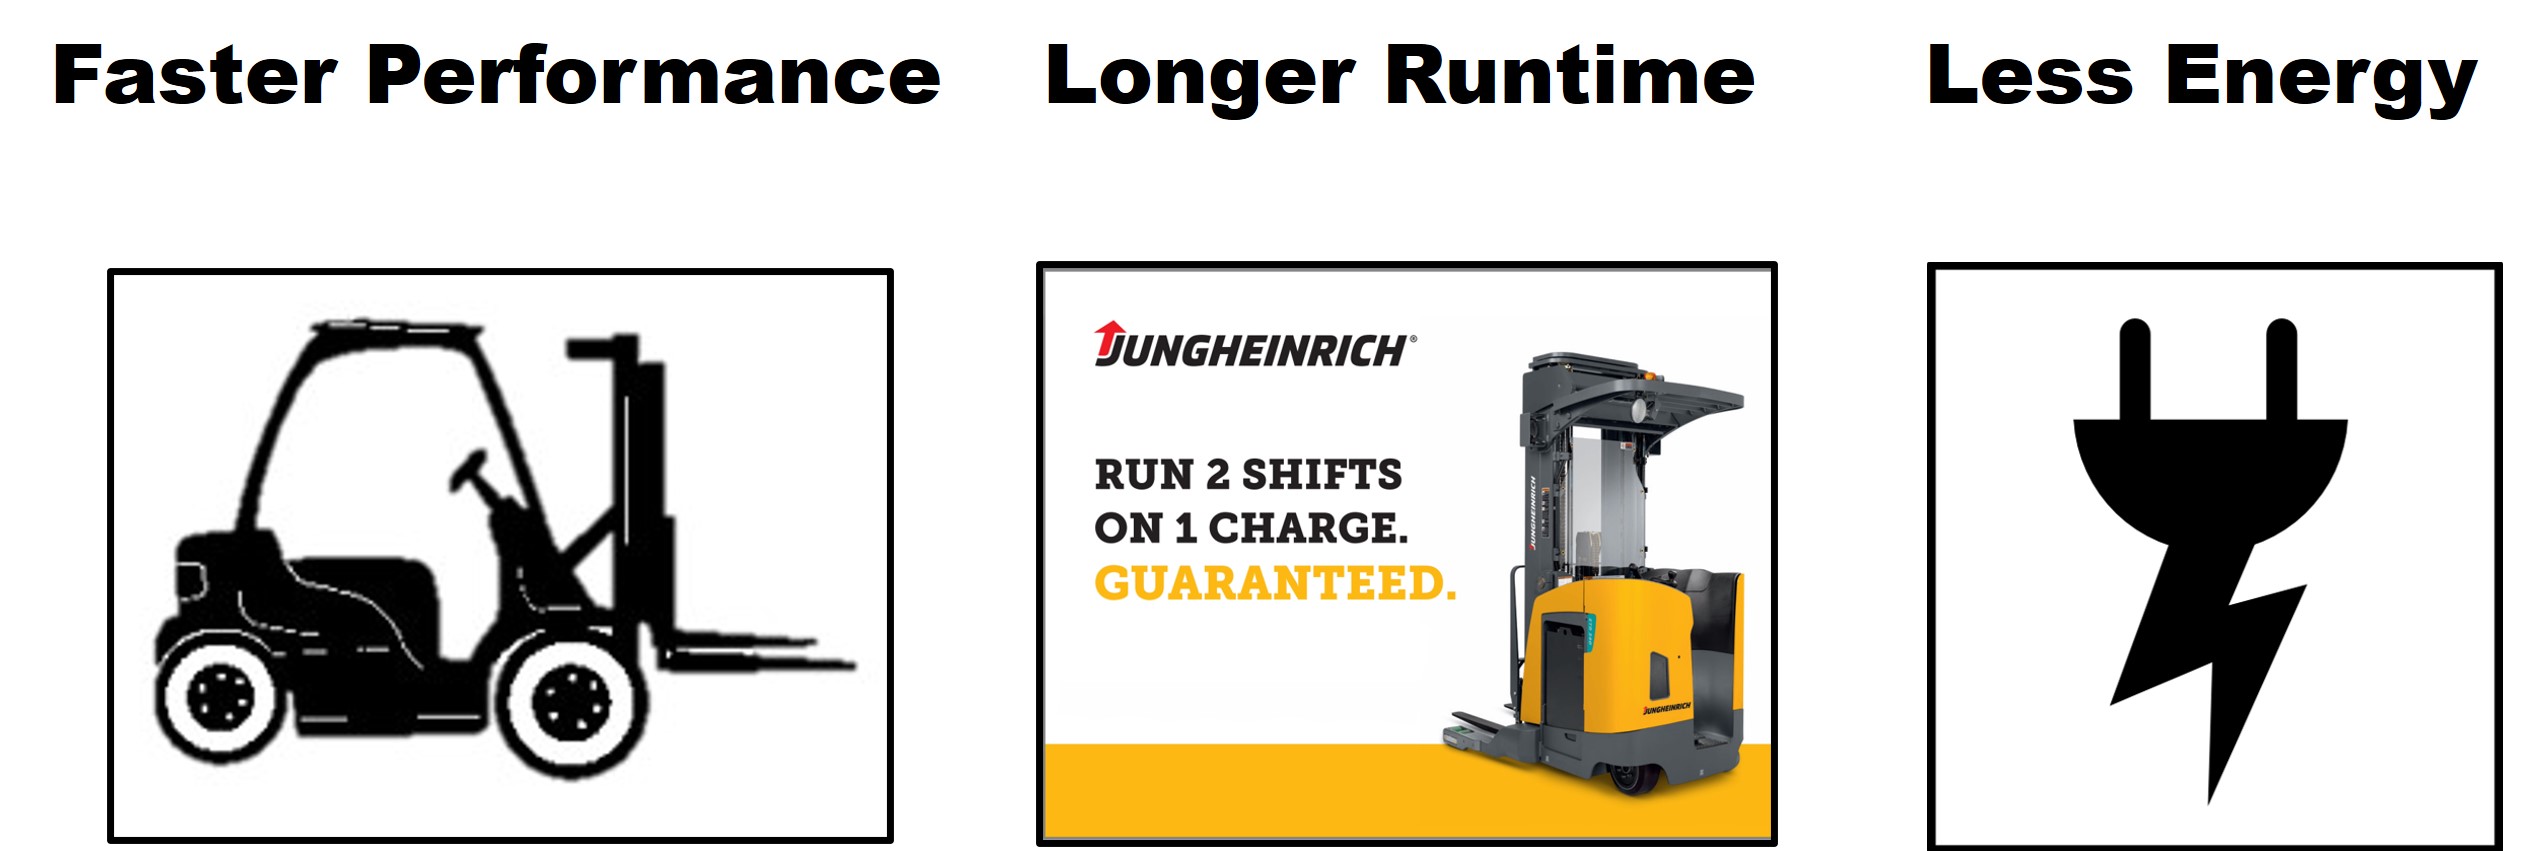 Wiese and Jungheinrich will save you money